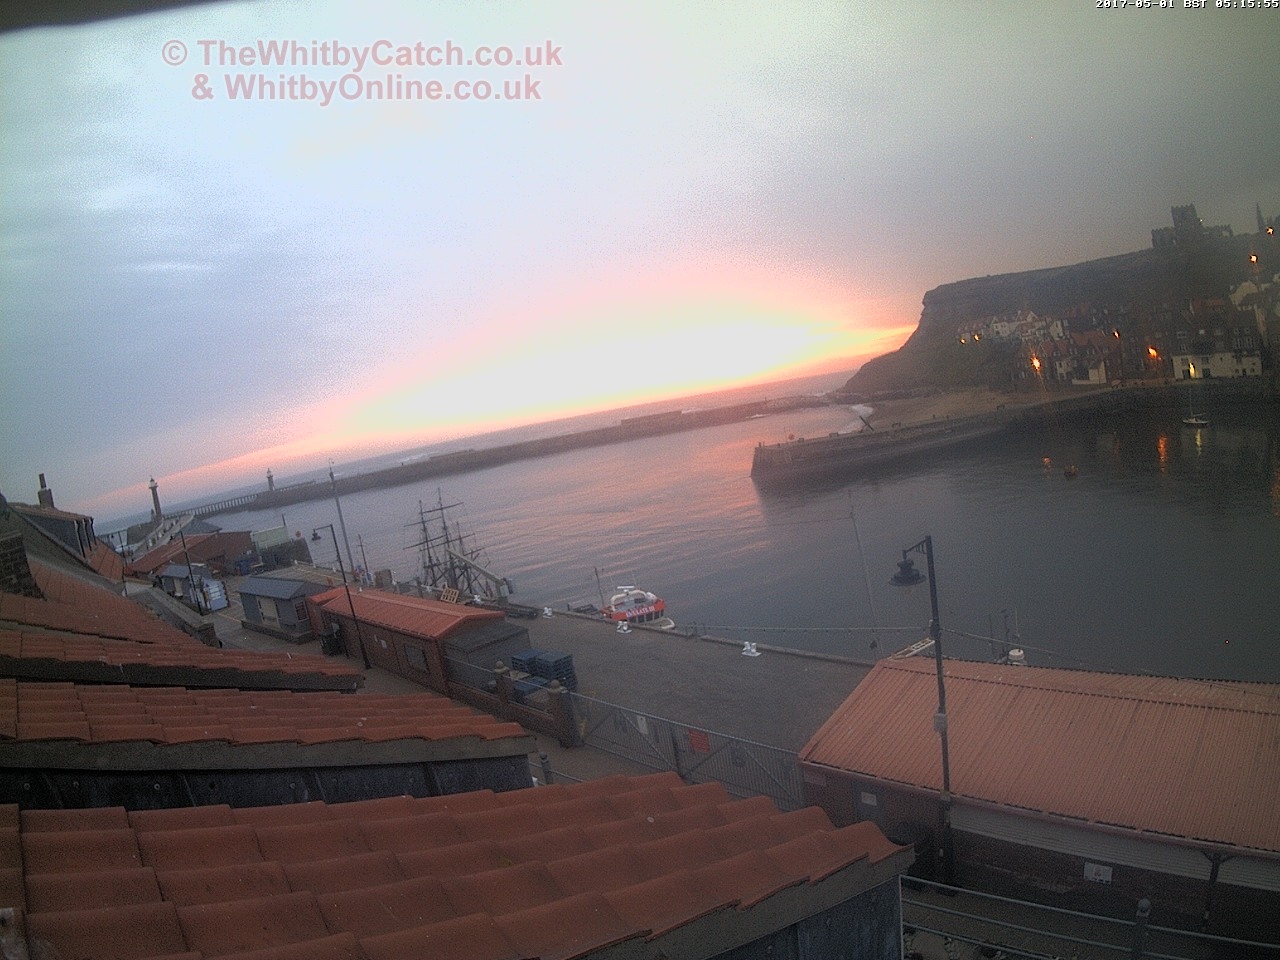 Whitby Mon 1st May 2017 05:16.